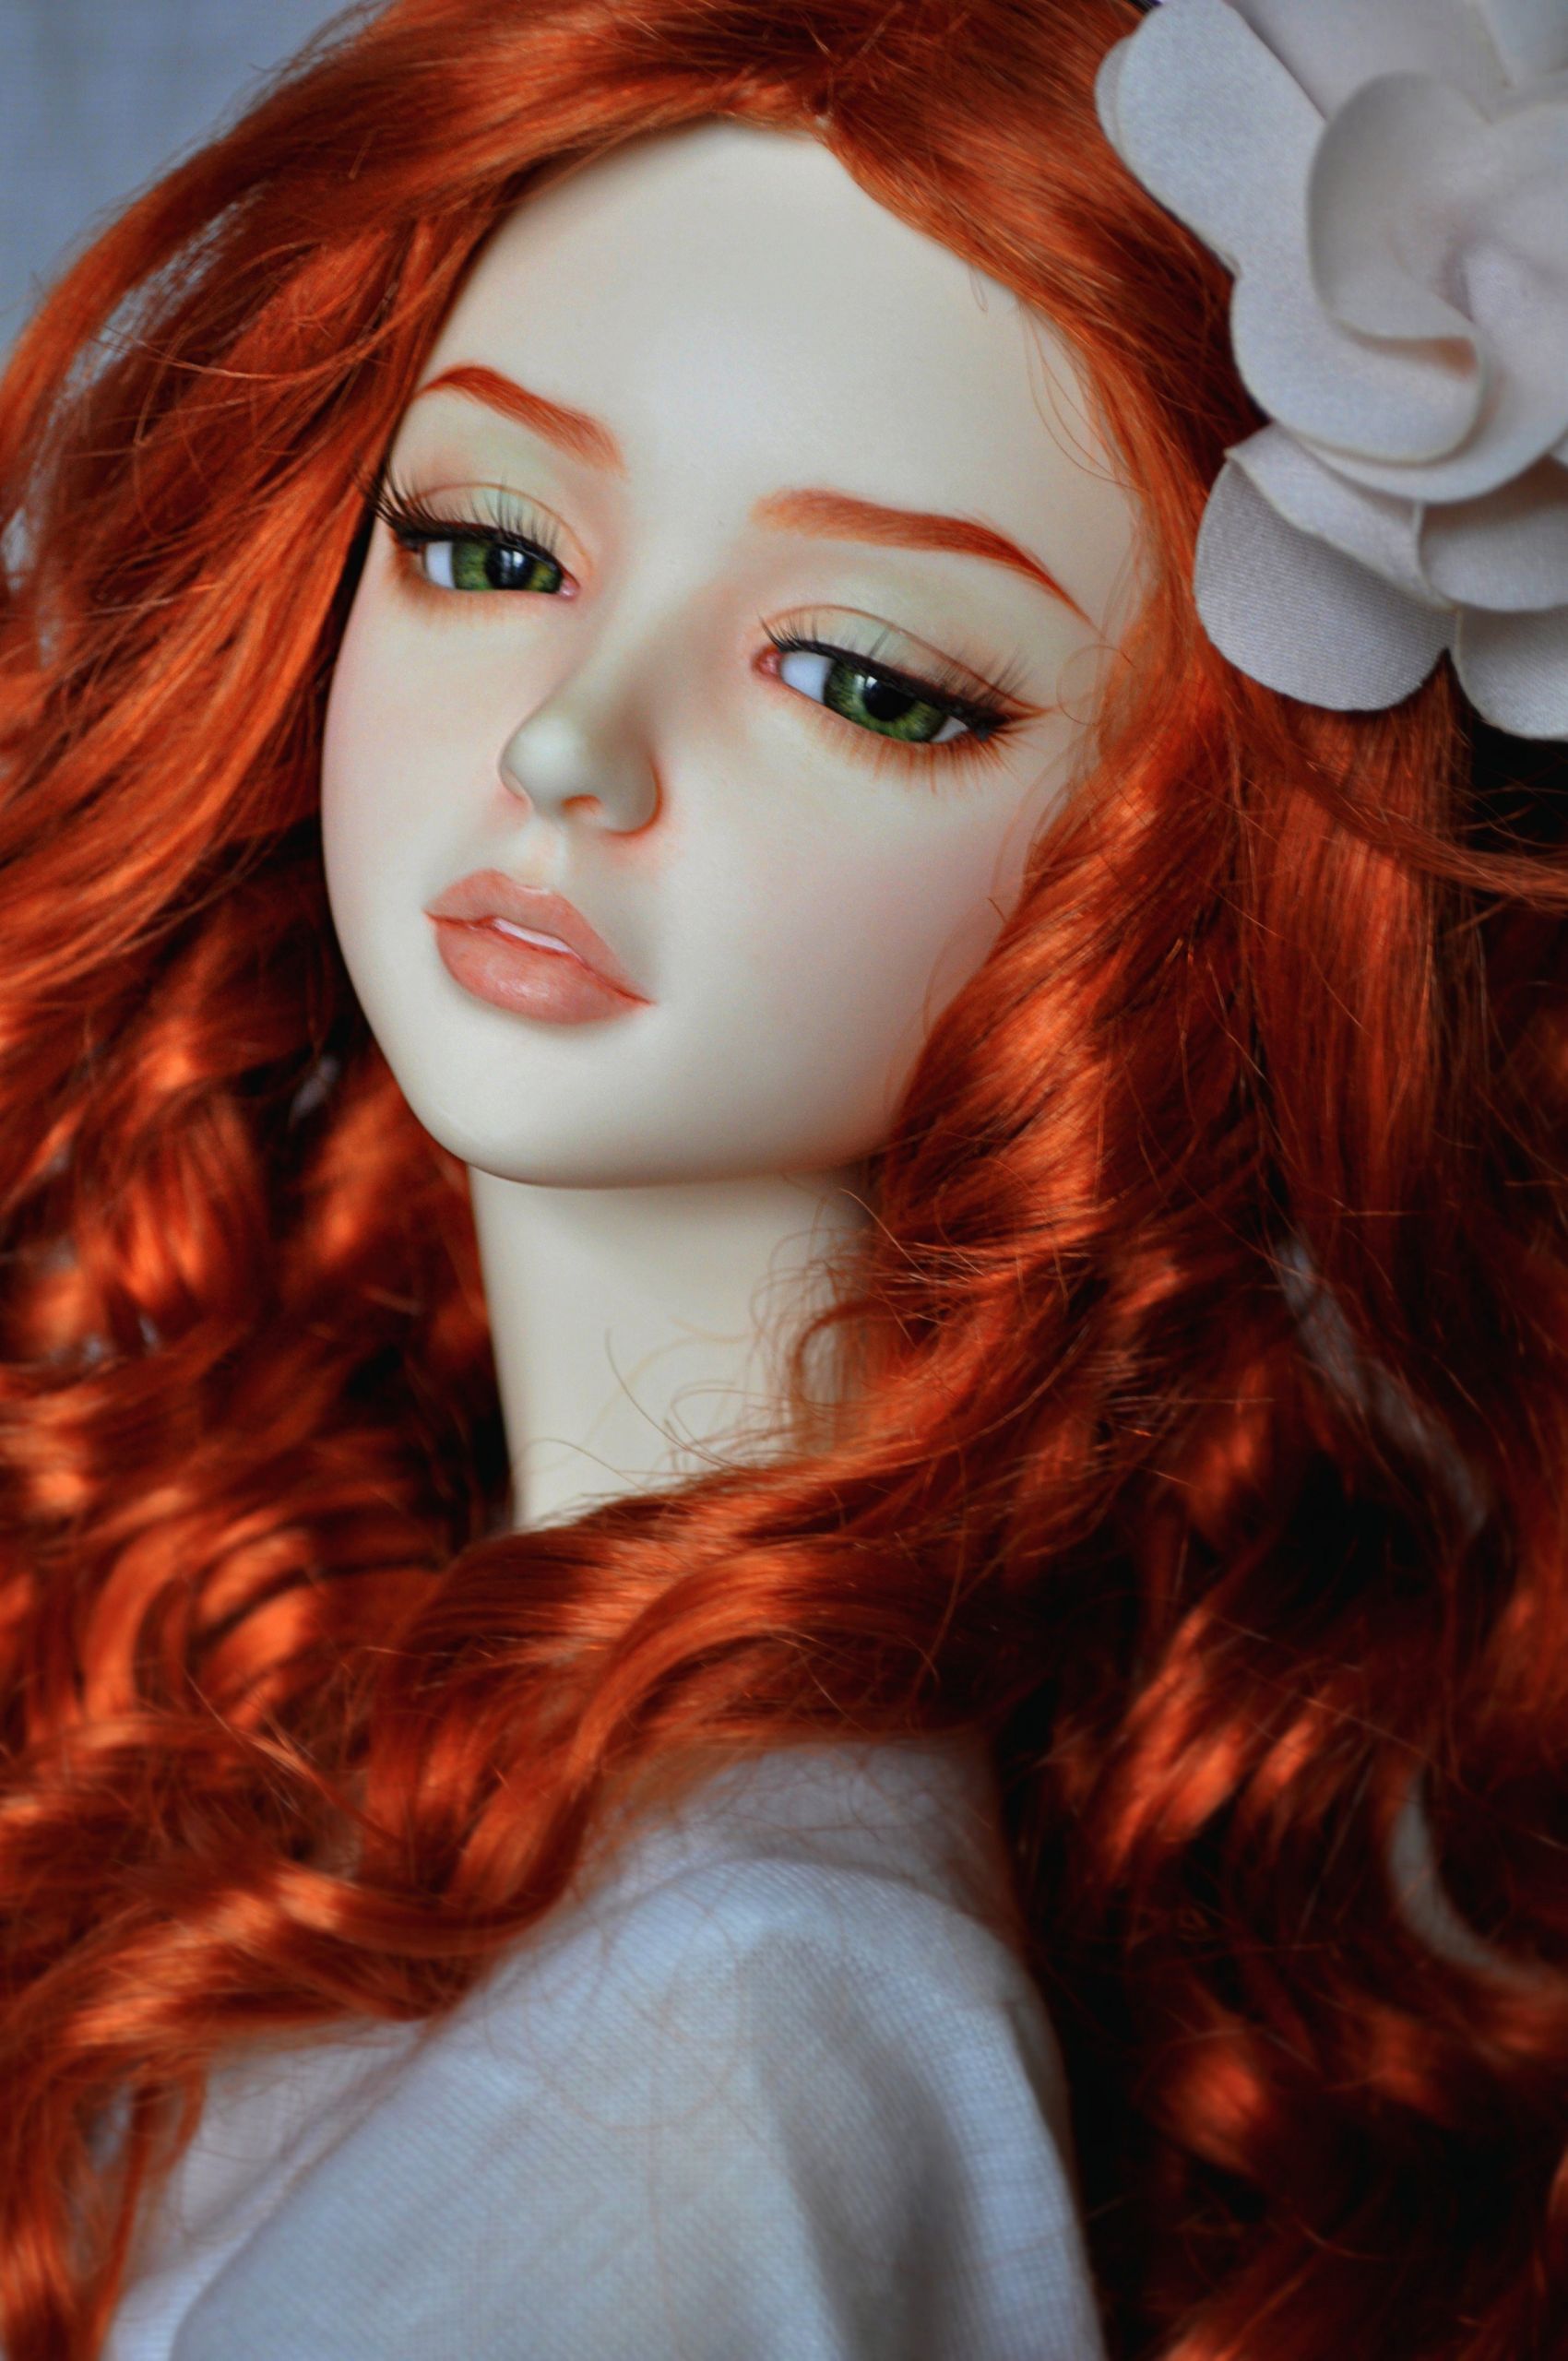 Baby Dolls With Red Hair
 Toys doll baby long hair girl beautiful red hair green eyes wallpaper 2848x4288